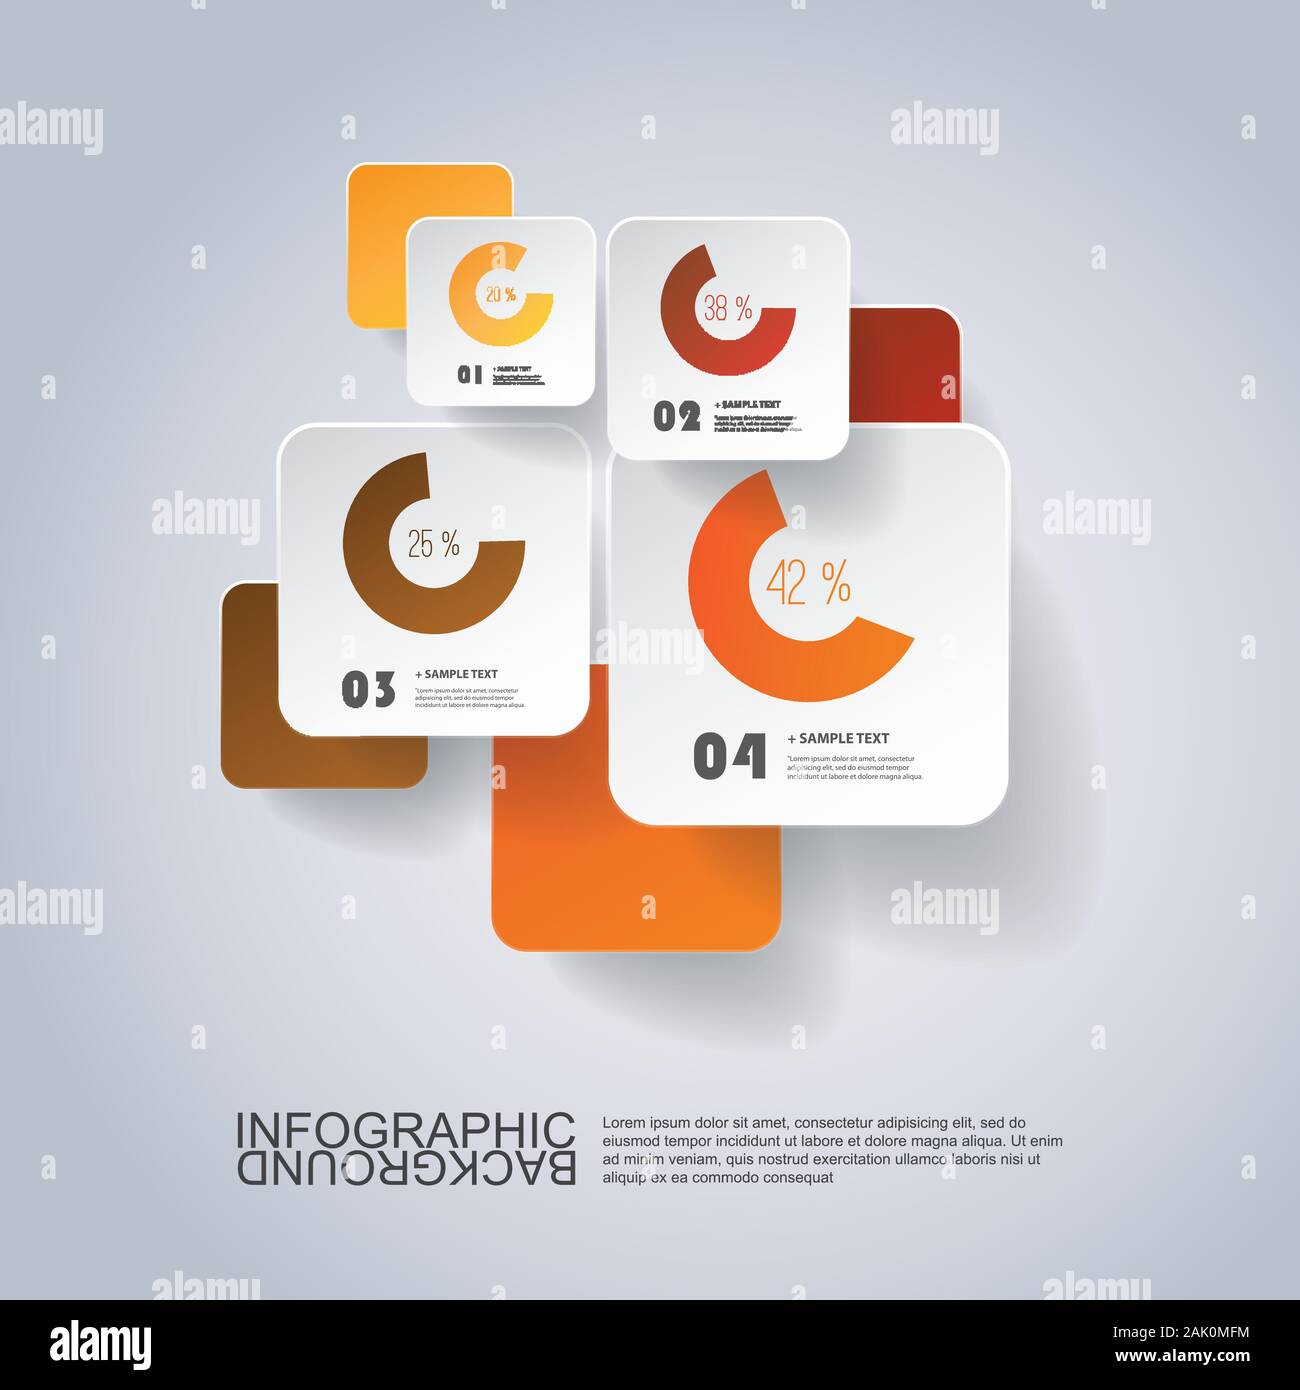 Infographic Design - Round Squares Design with Diagrams, Creative Design Template on Silver Grey Background - Illustration in Freely Editable Vector Stock Vector